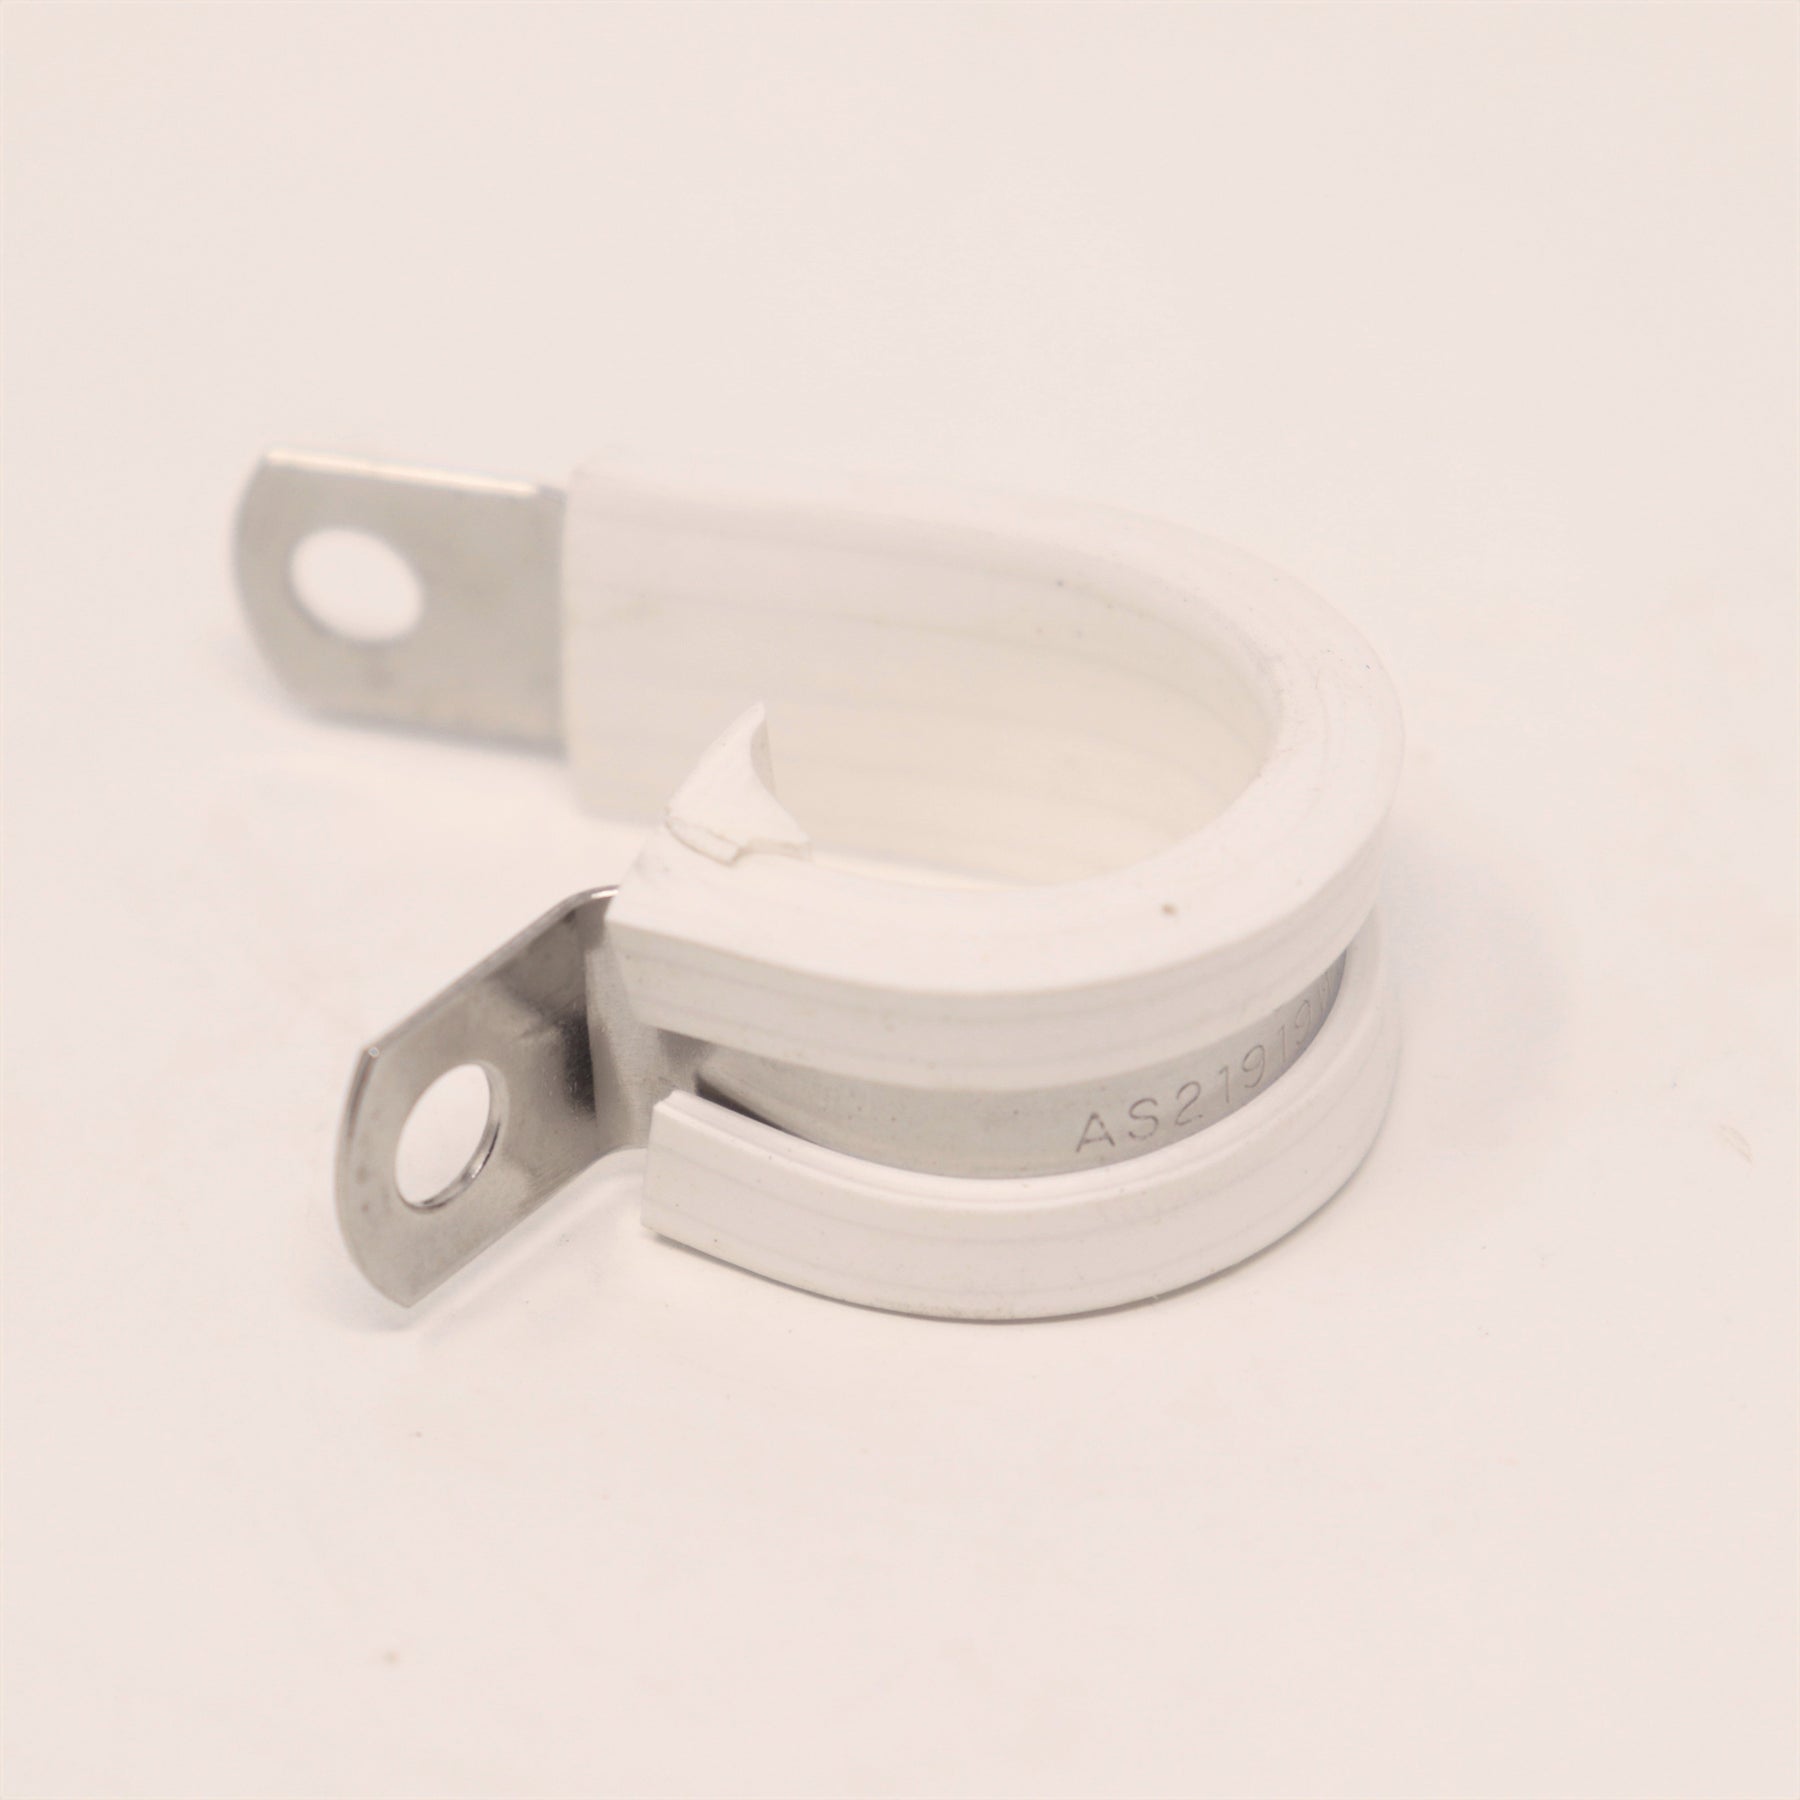 UMPCO Stainless Steel P Clamp White AS21919WCH12